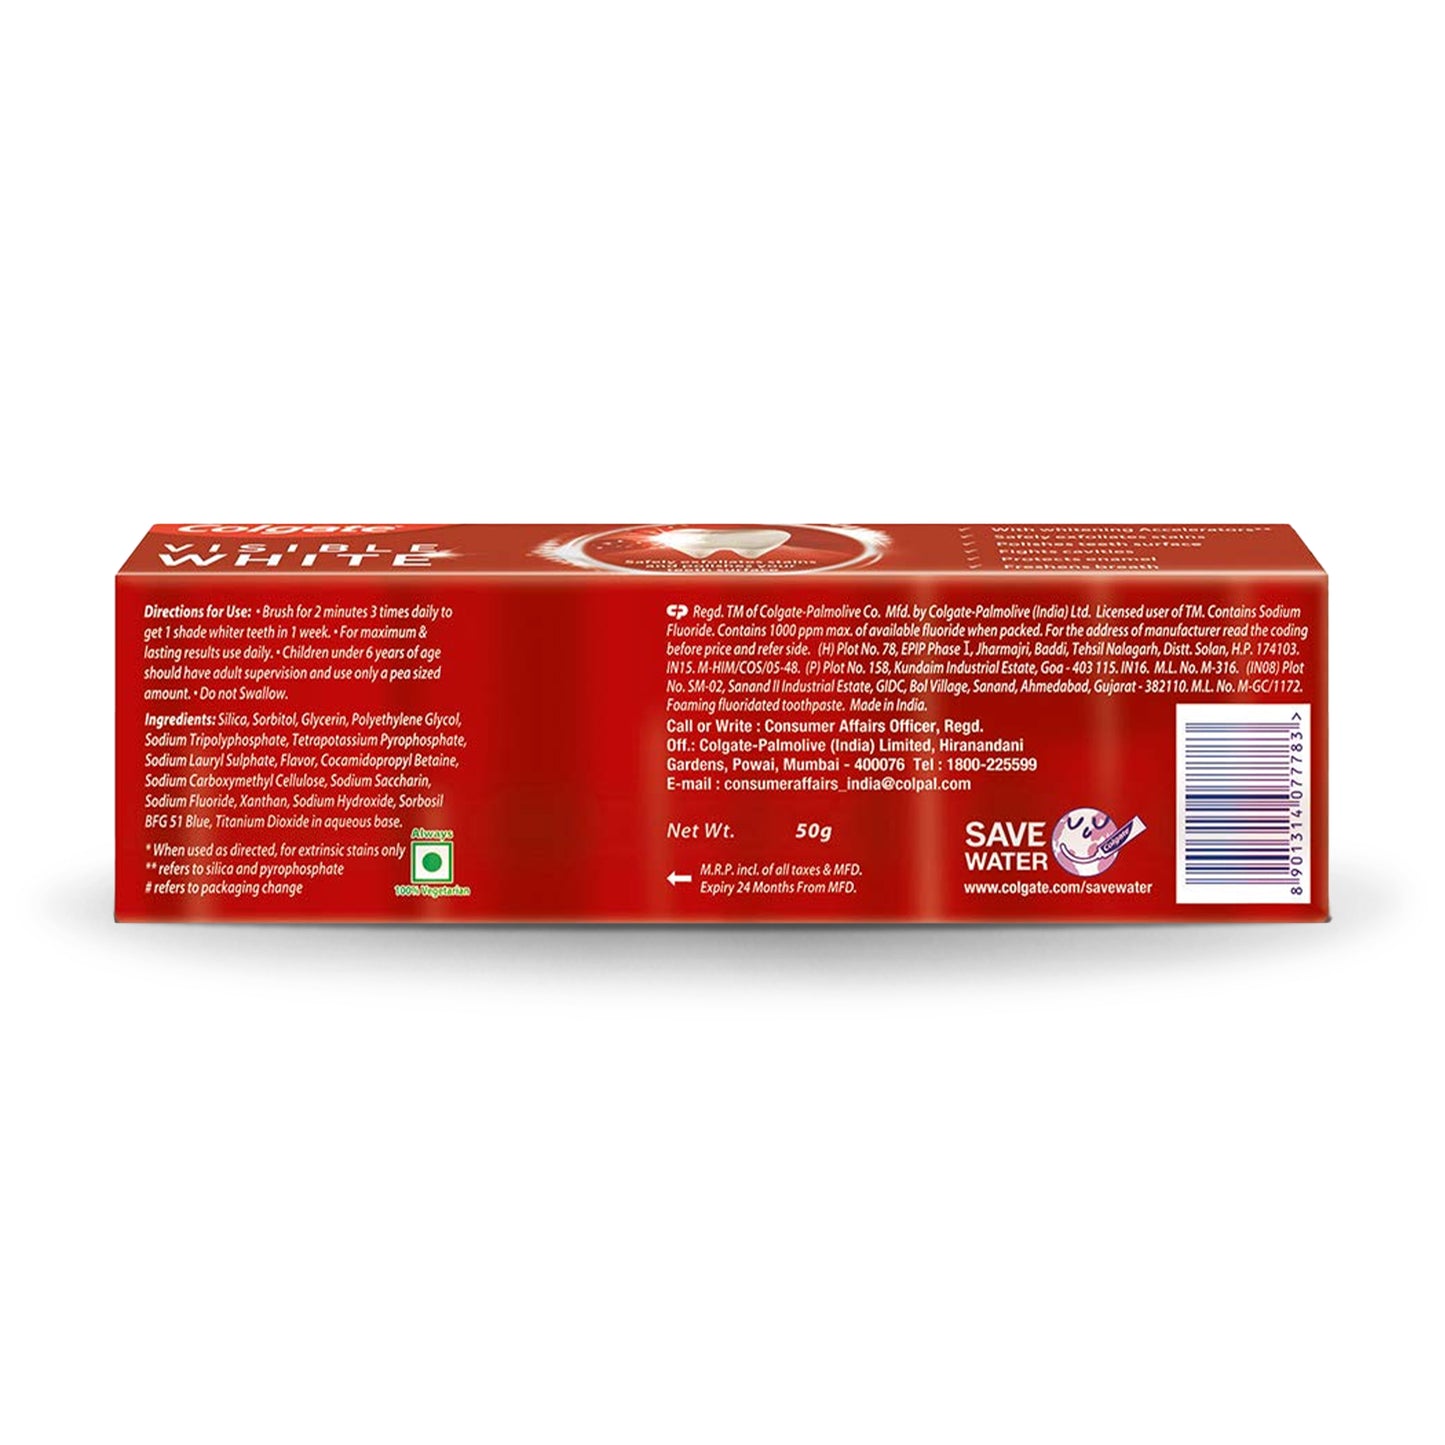 Colgate Visible White Teeth Whitening Toothpaste, 50gm